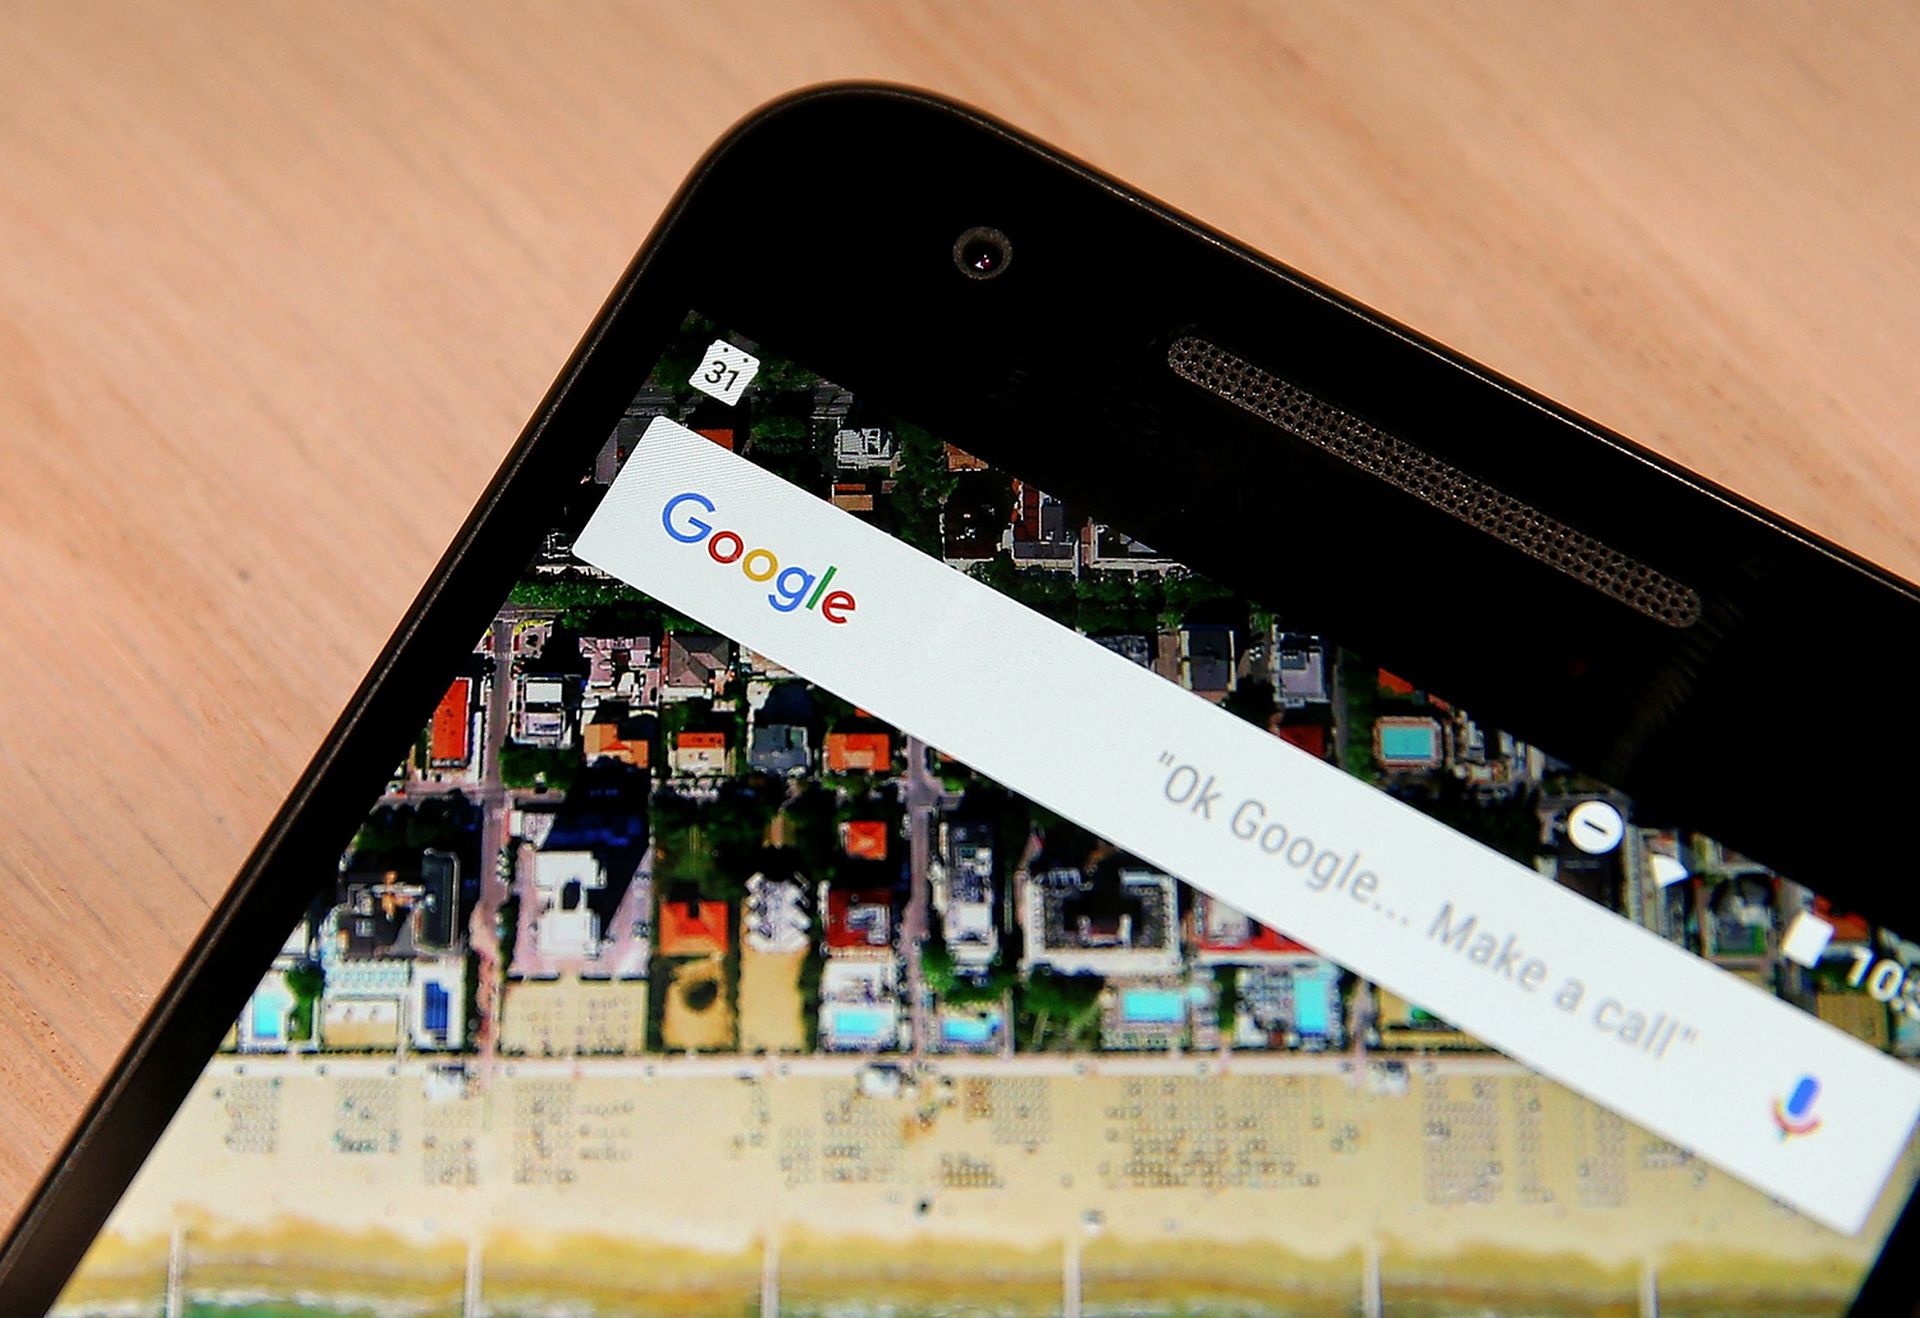 F5 researchers reported seeing financial malware MaliBot targeting users of Android devices. Pictured: The Google logo is displayed on a Nexus 5X phone on Sept. 29, 2015, in San Francisco. (Photo by Justin Sullivan/Getty Images)